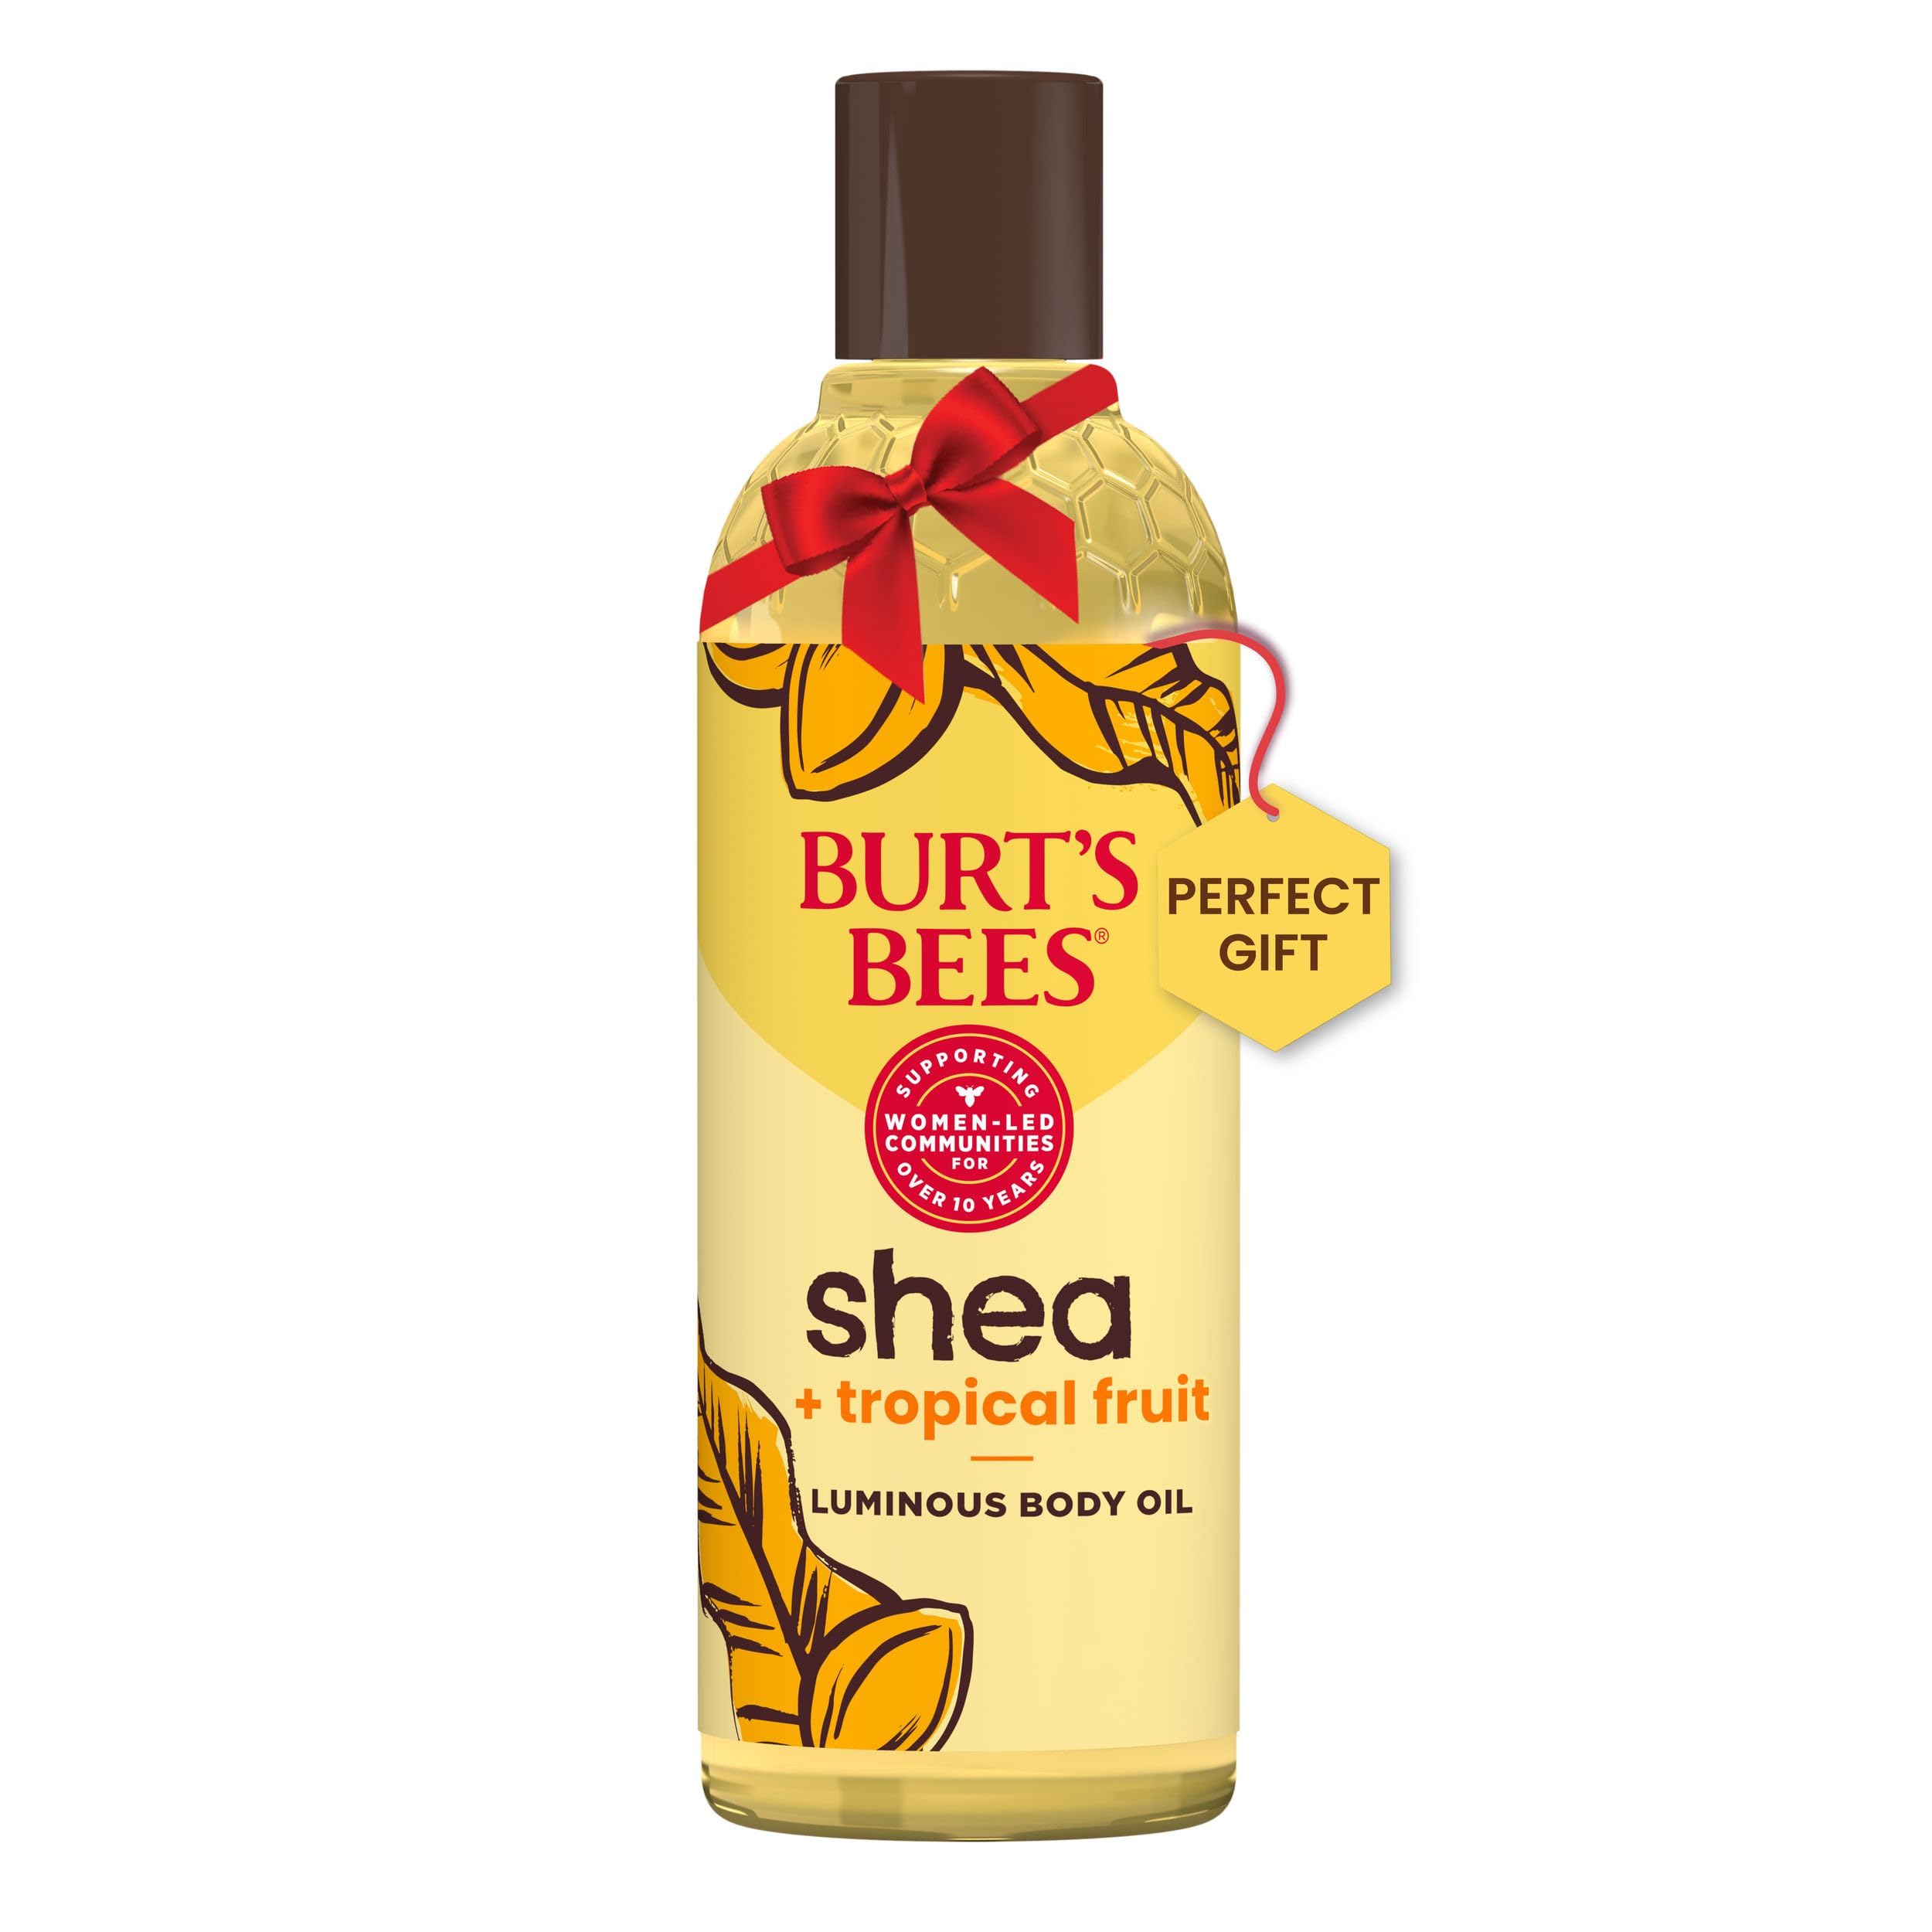 Burt's Bees Shea + Tropical Fruit Luminous Body Oil, Stocking Stuffers with Indulgent Antioxidant & Vitamin Rich Formula, Skincare Christmas Gifts, 8 oz. (Packaging May Vary)